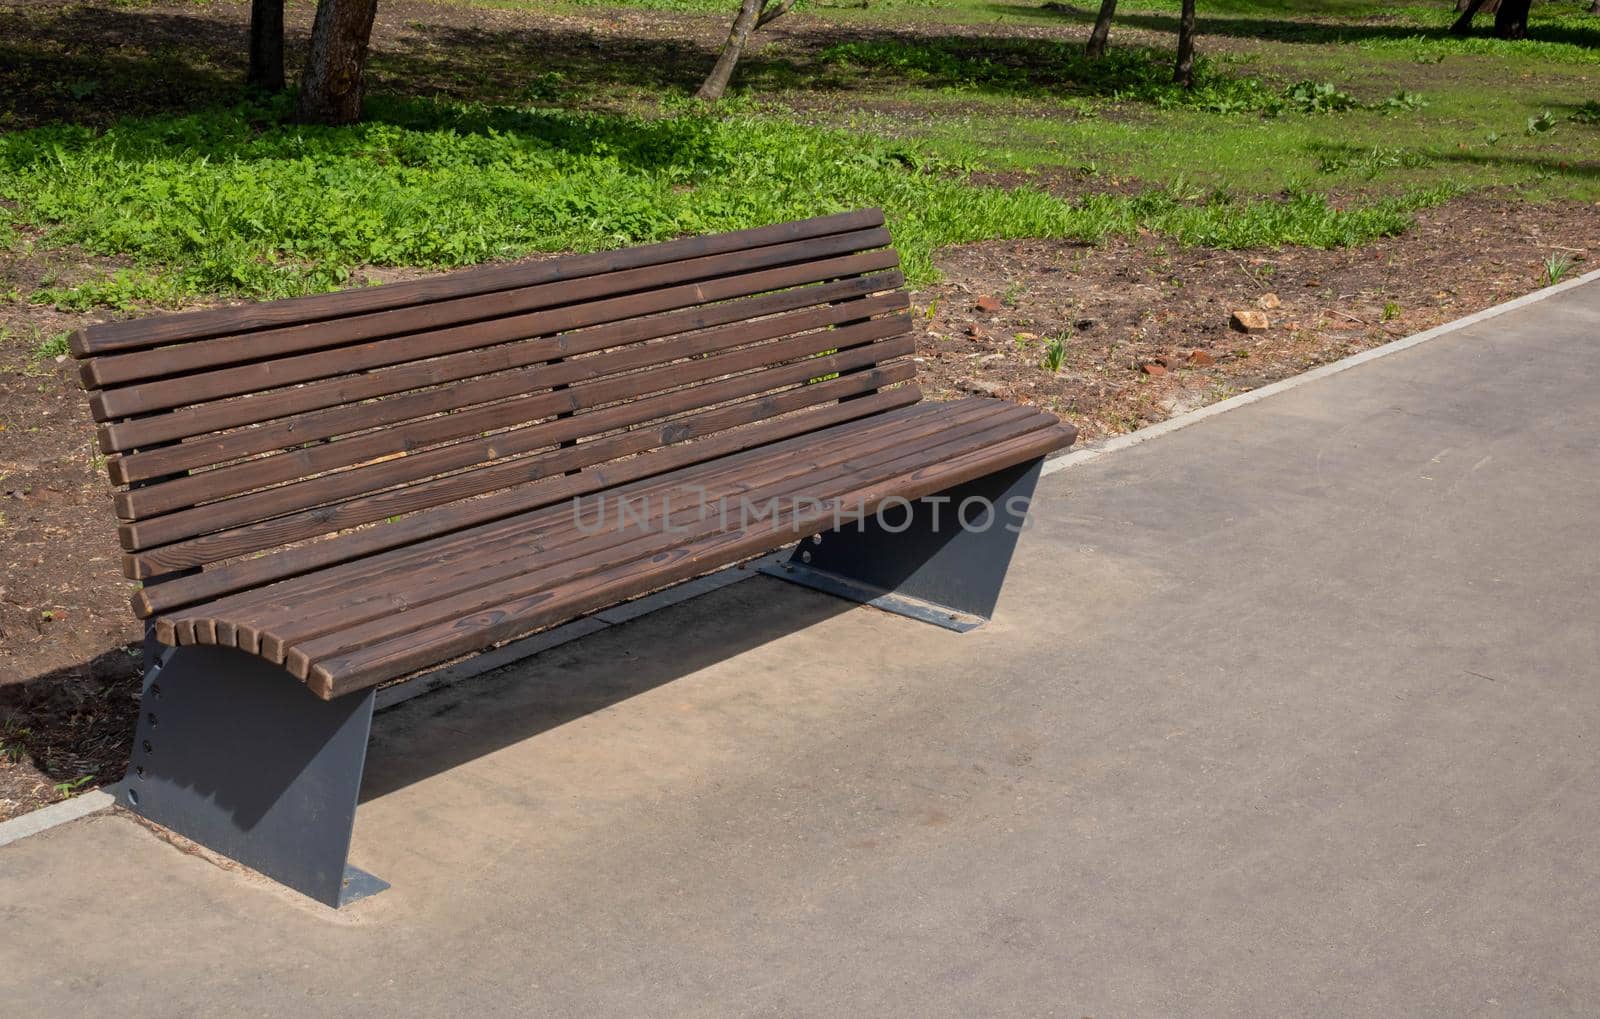 Wooden brown bench in the city park on a bright spring day.